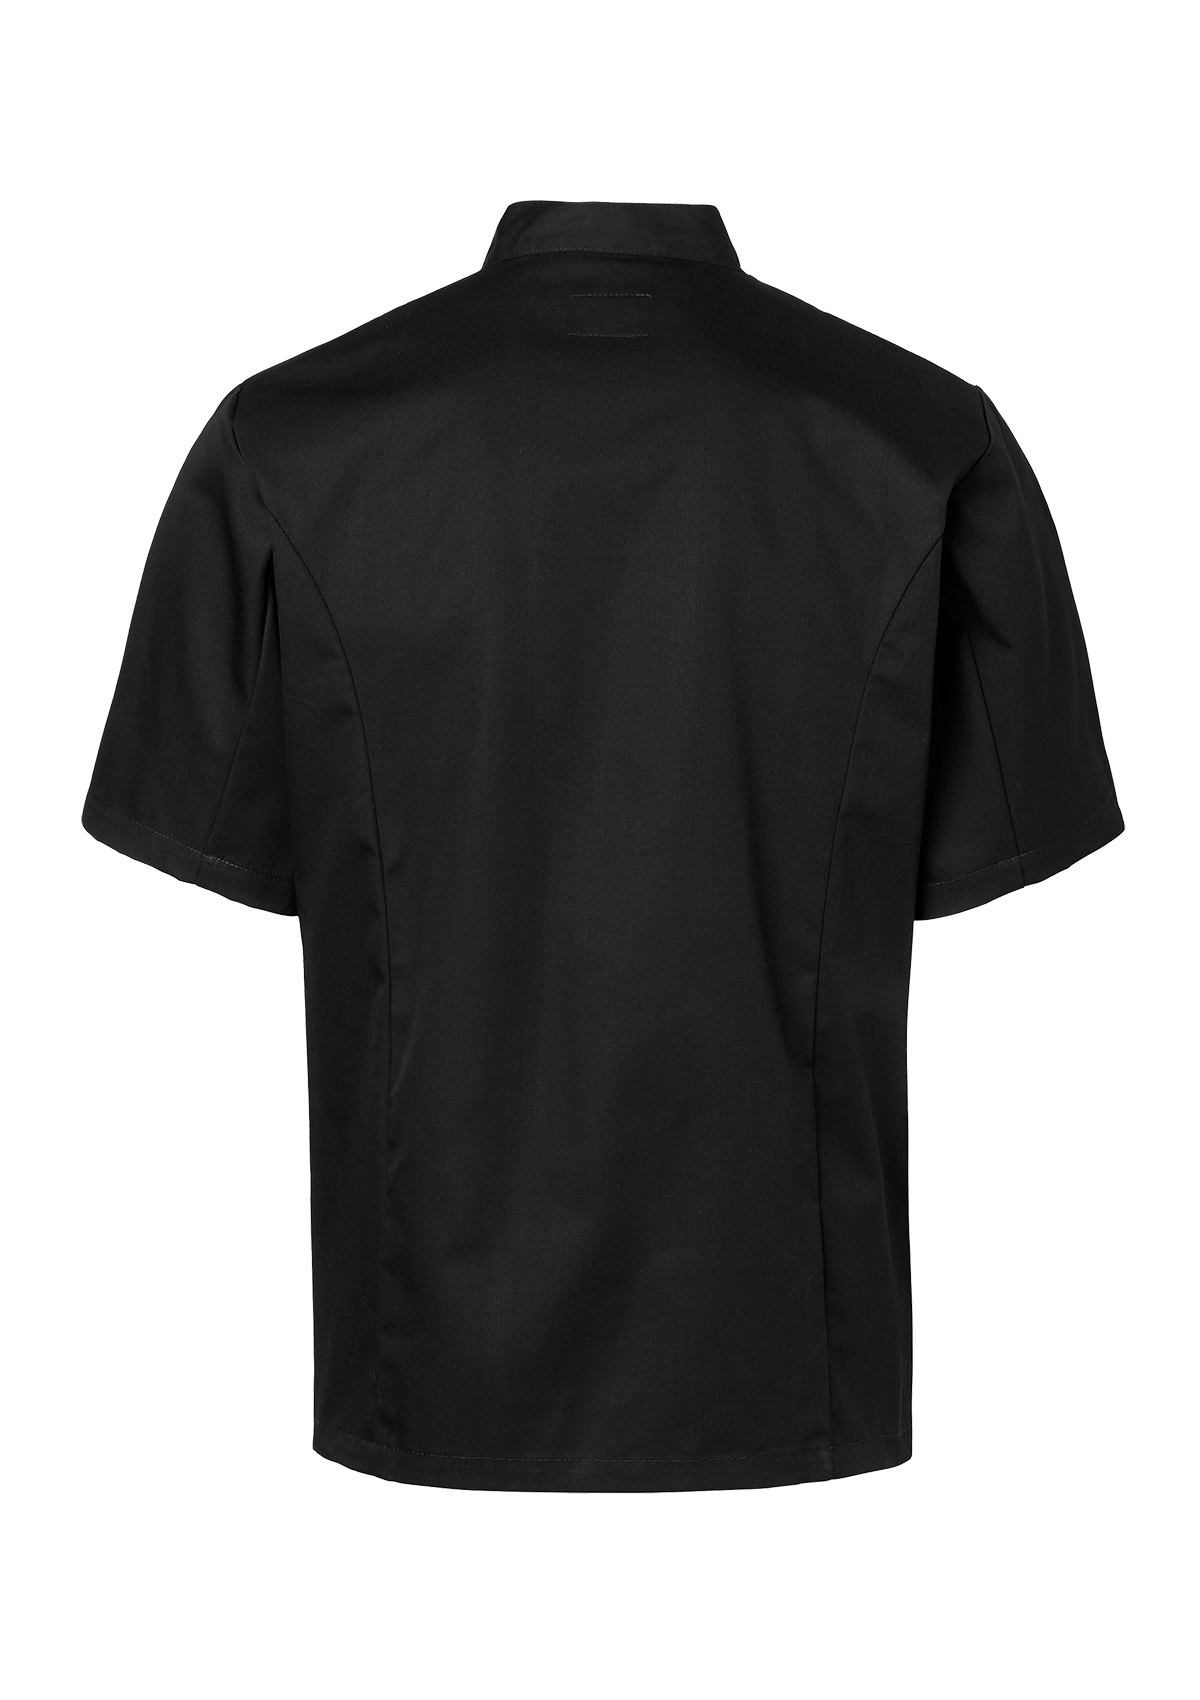 Men's Chef's jacket in straight cut with short sleeves. Segers | Cookniche